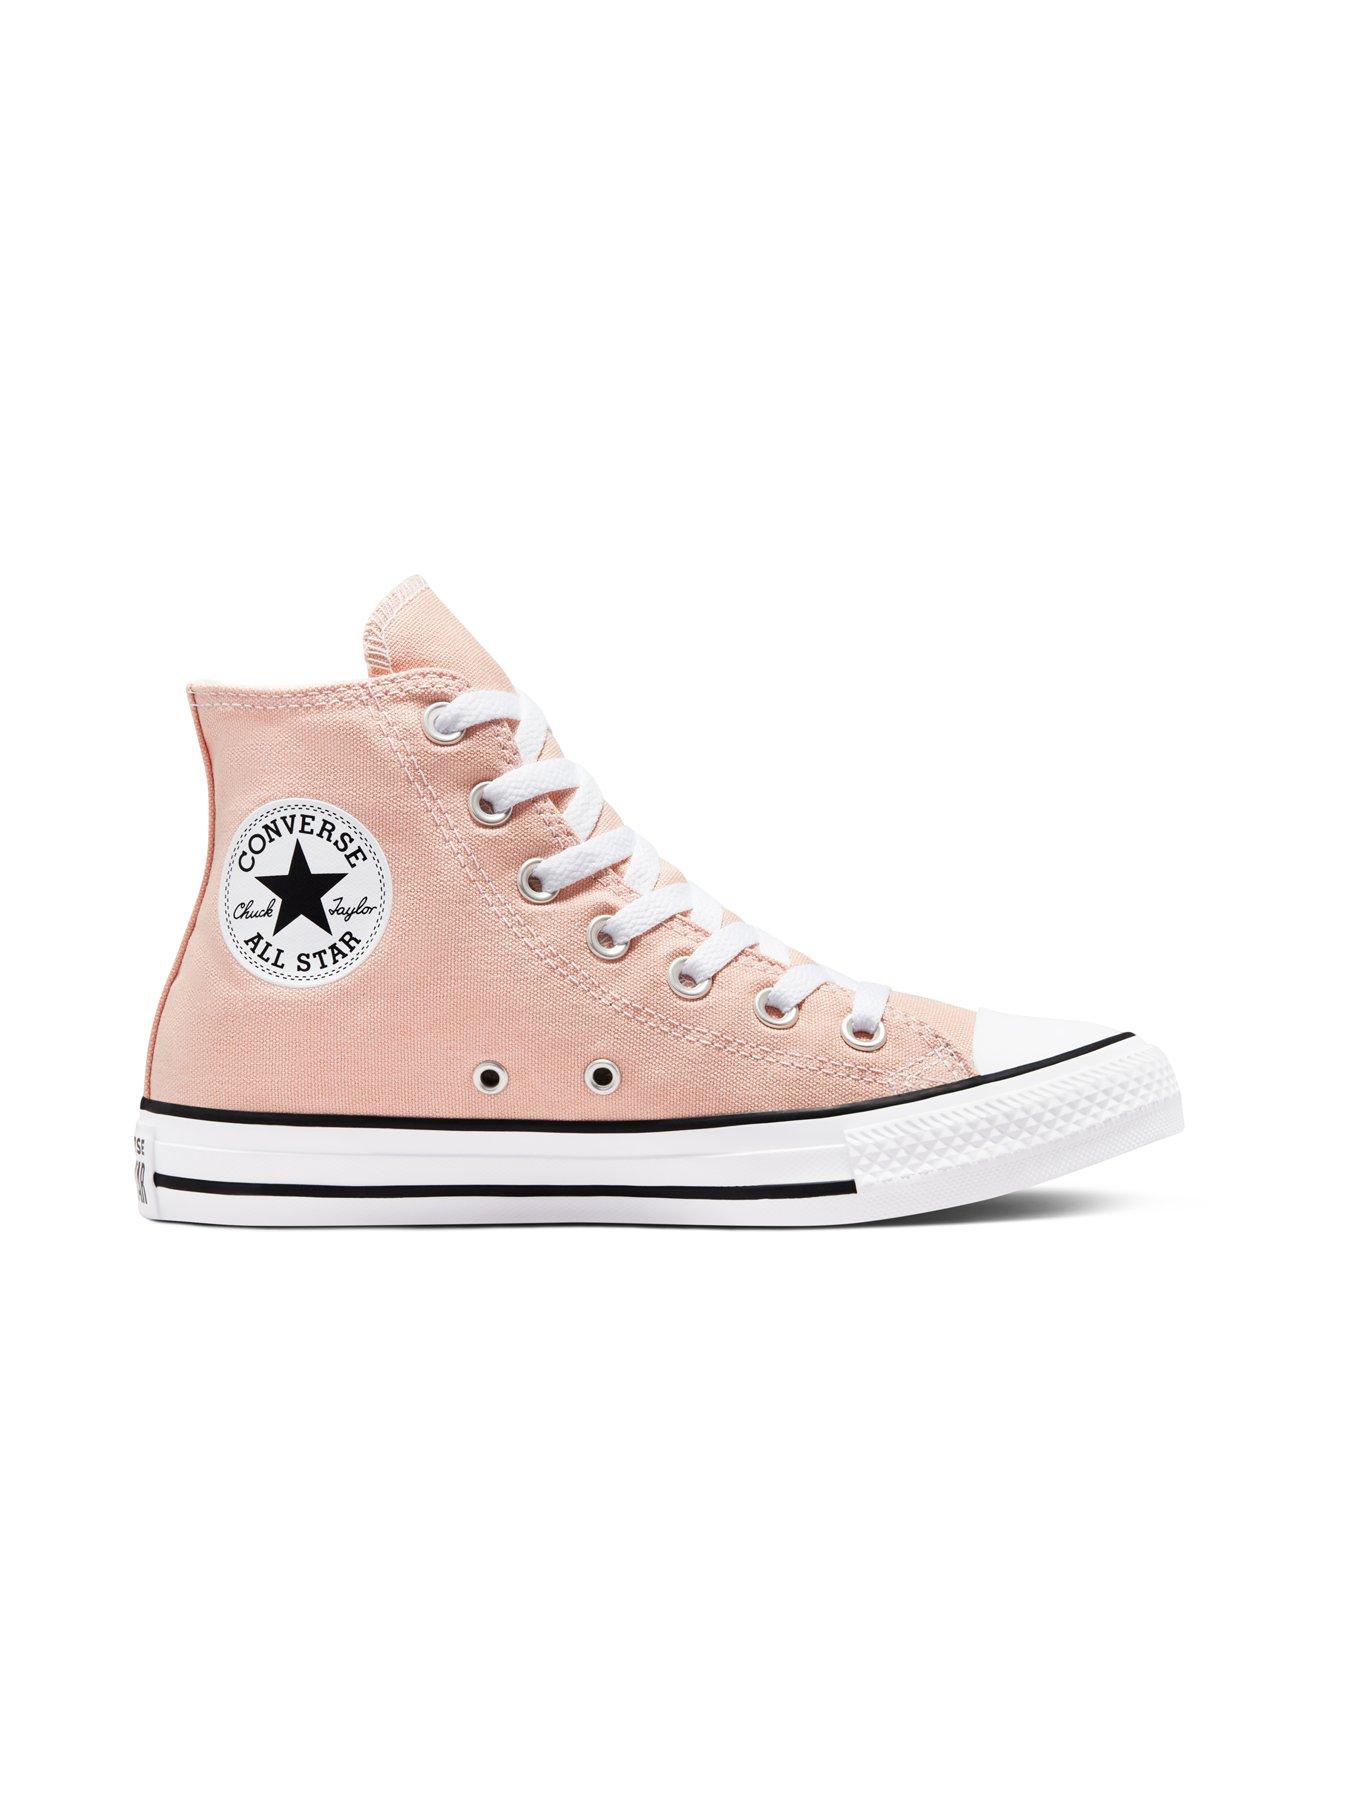 Women Chuck Taylor All Star Partially Recycled Cotton Hi Top Trainers - Pink/White